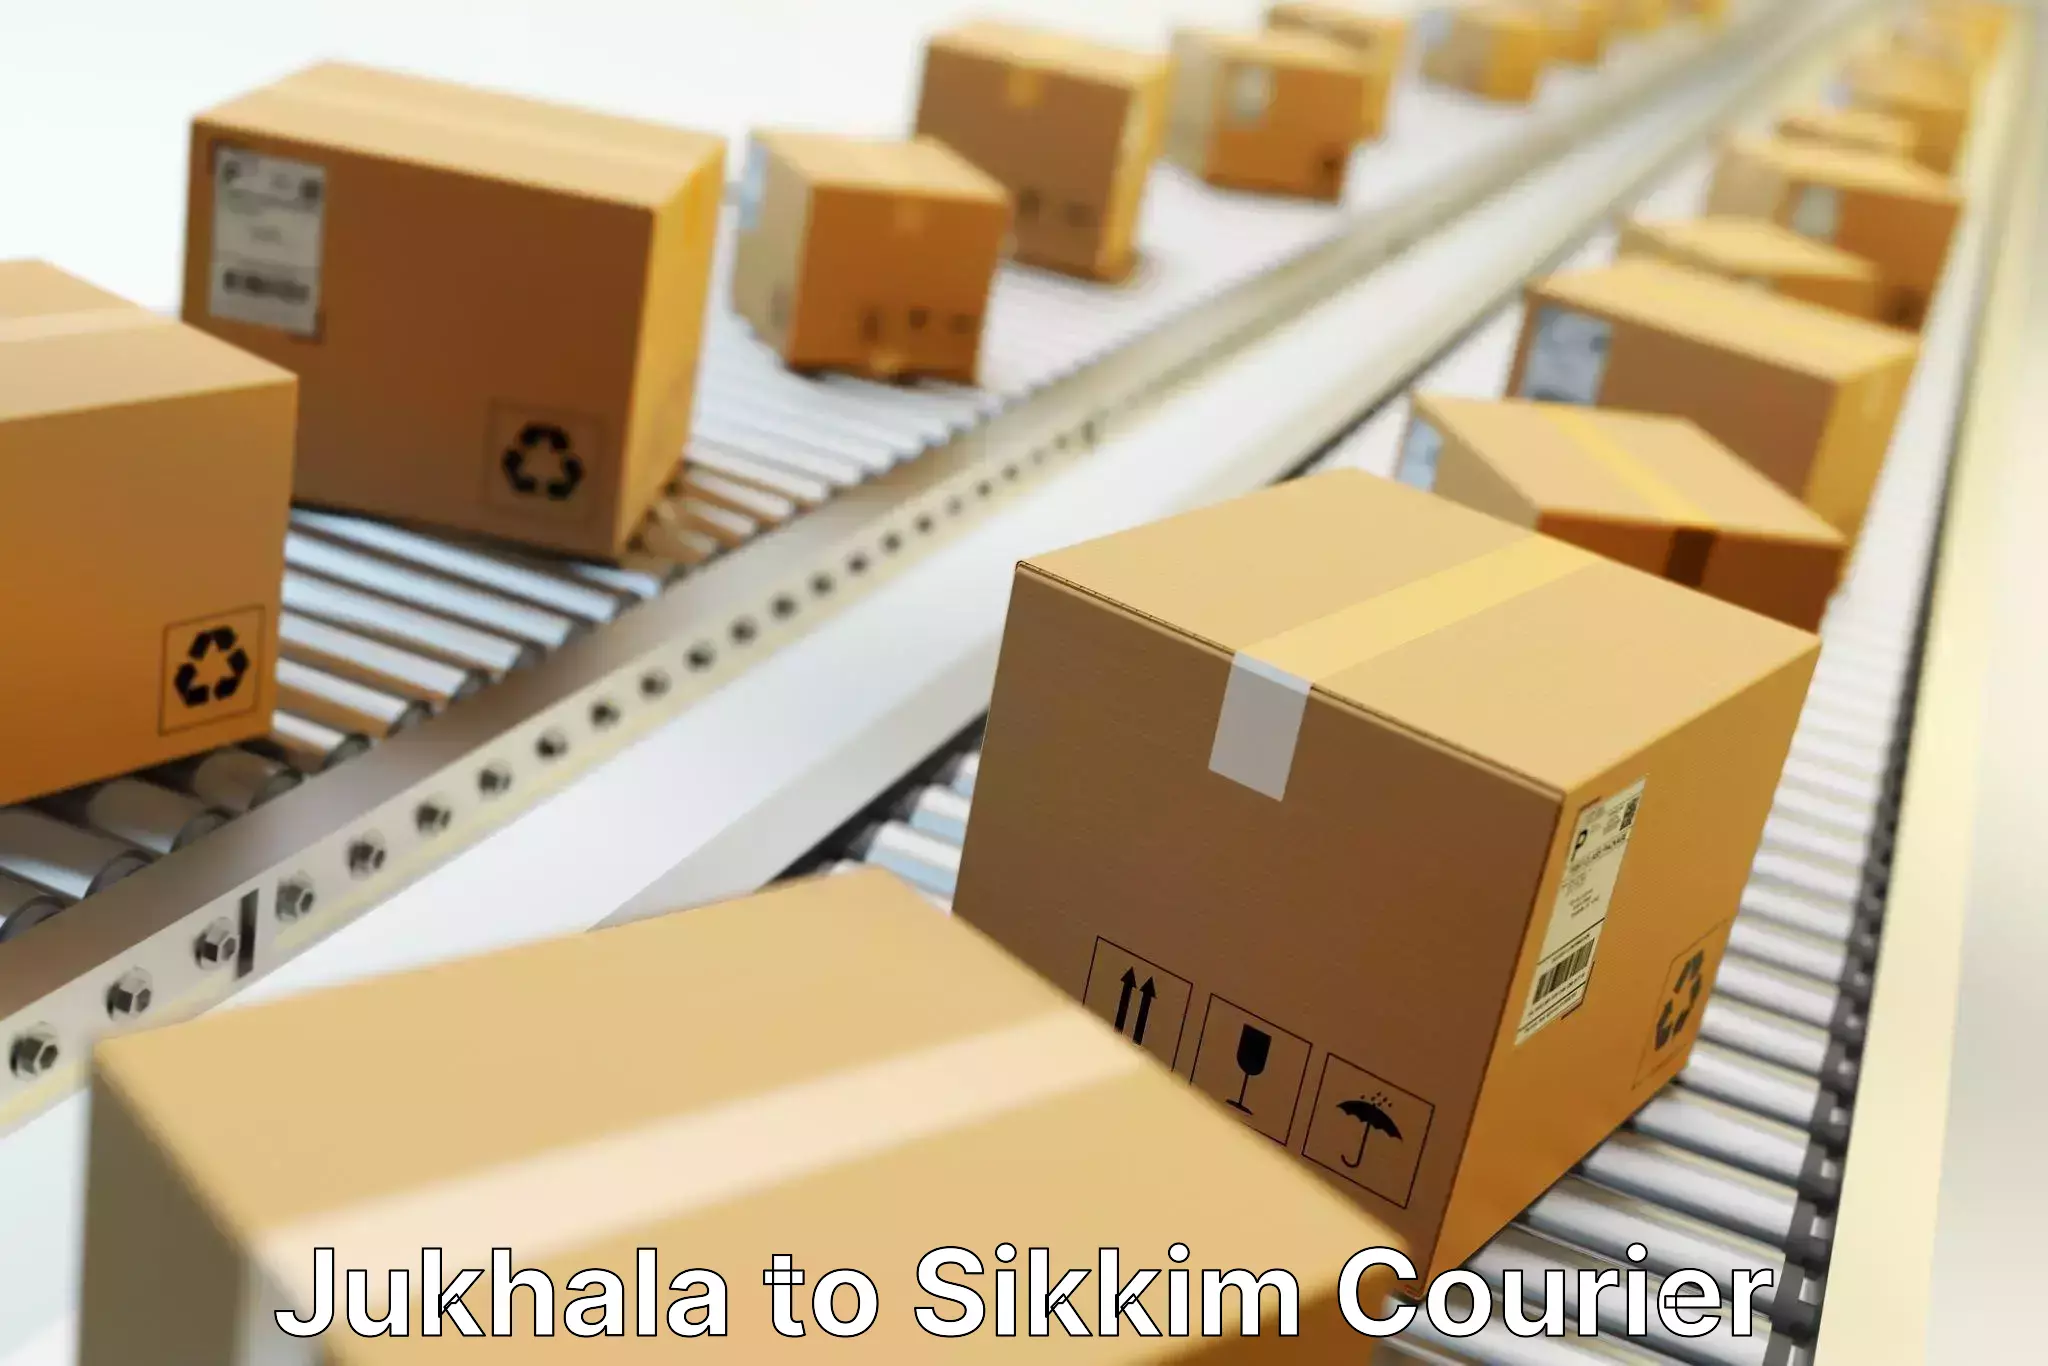 State-of-the-art courier technology Jukhala to Pelling